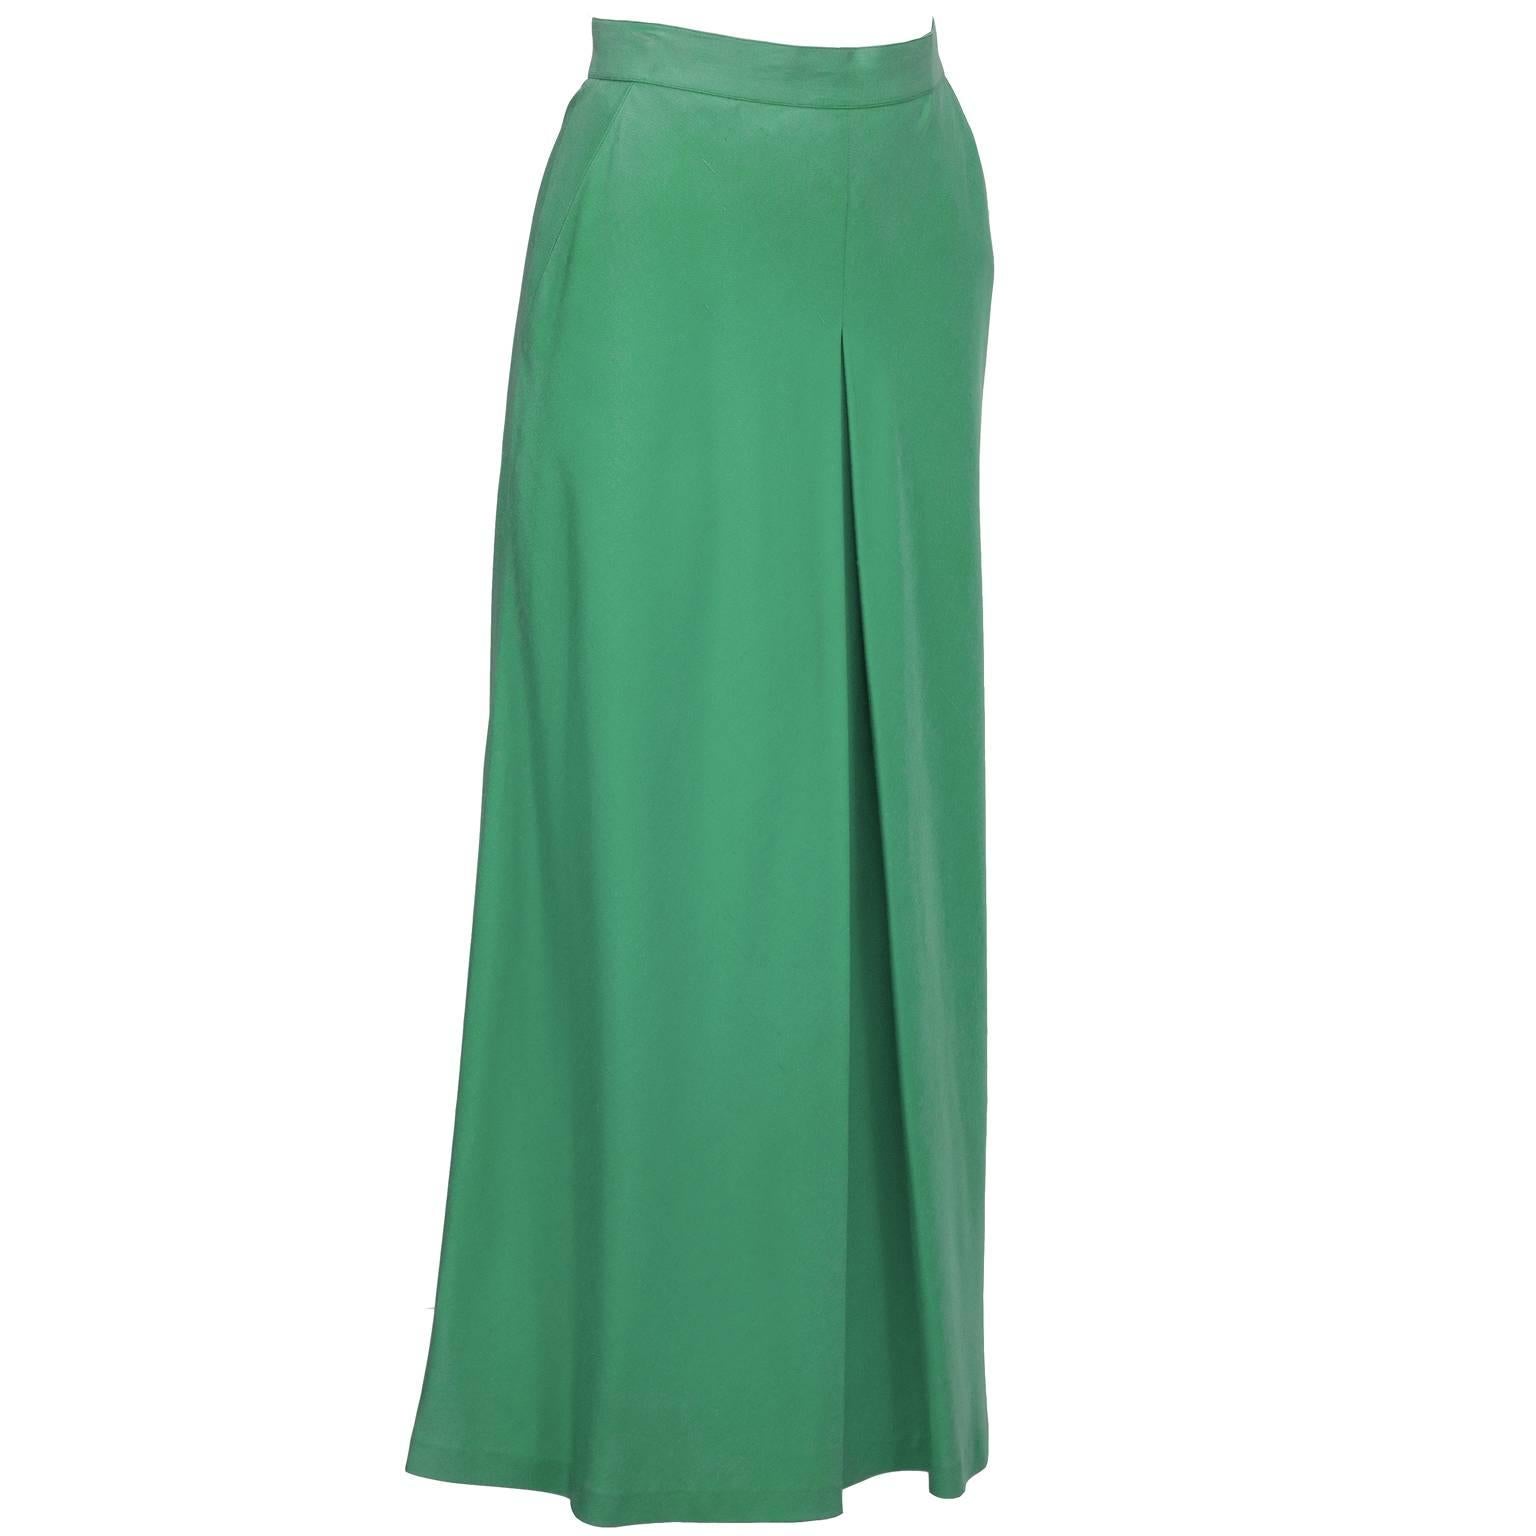 Chanel leaf green single pleat silk maxi skirt circa 1980's. Narrow side button waist band over side zipper finished with a single gold button. Single center pleat and soft triangular sweep and 2 silk lined pockets make this faux culotte maxi skirt